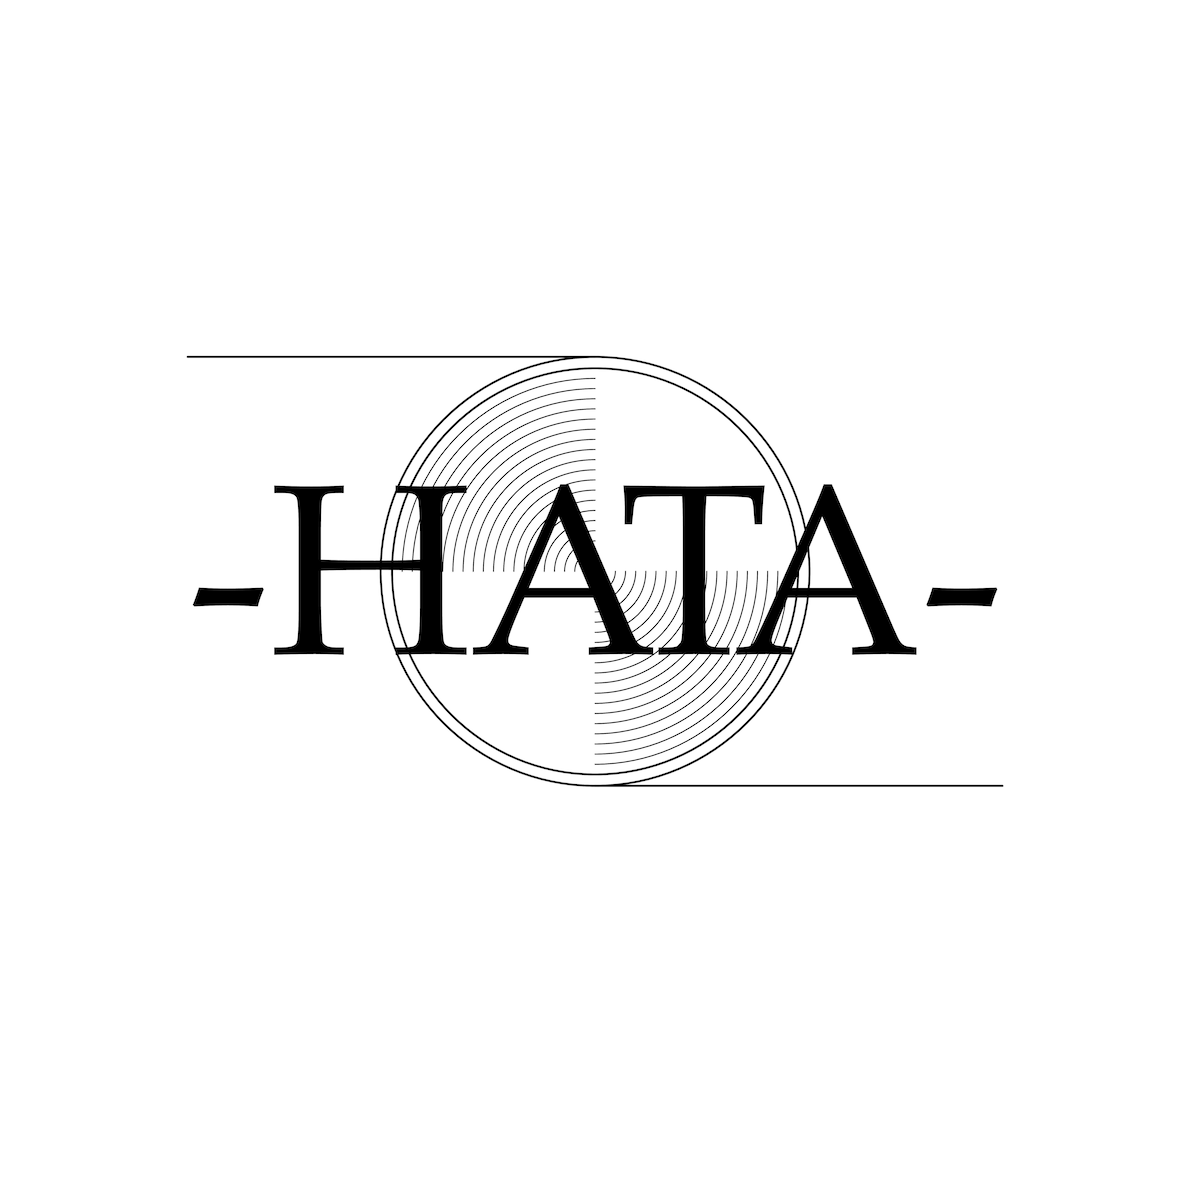 hataspecial.handcrafted.jp